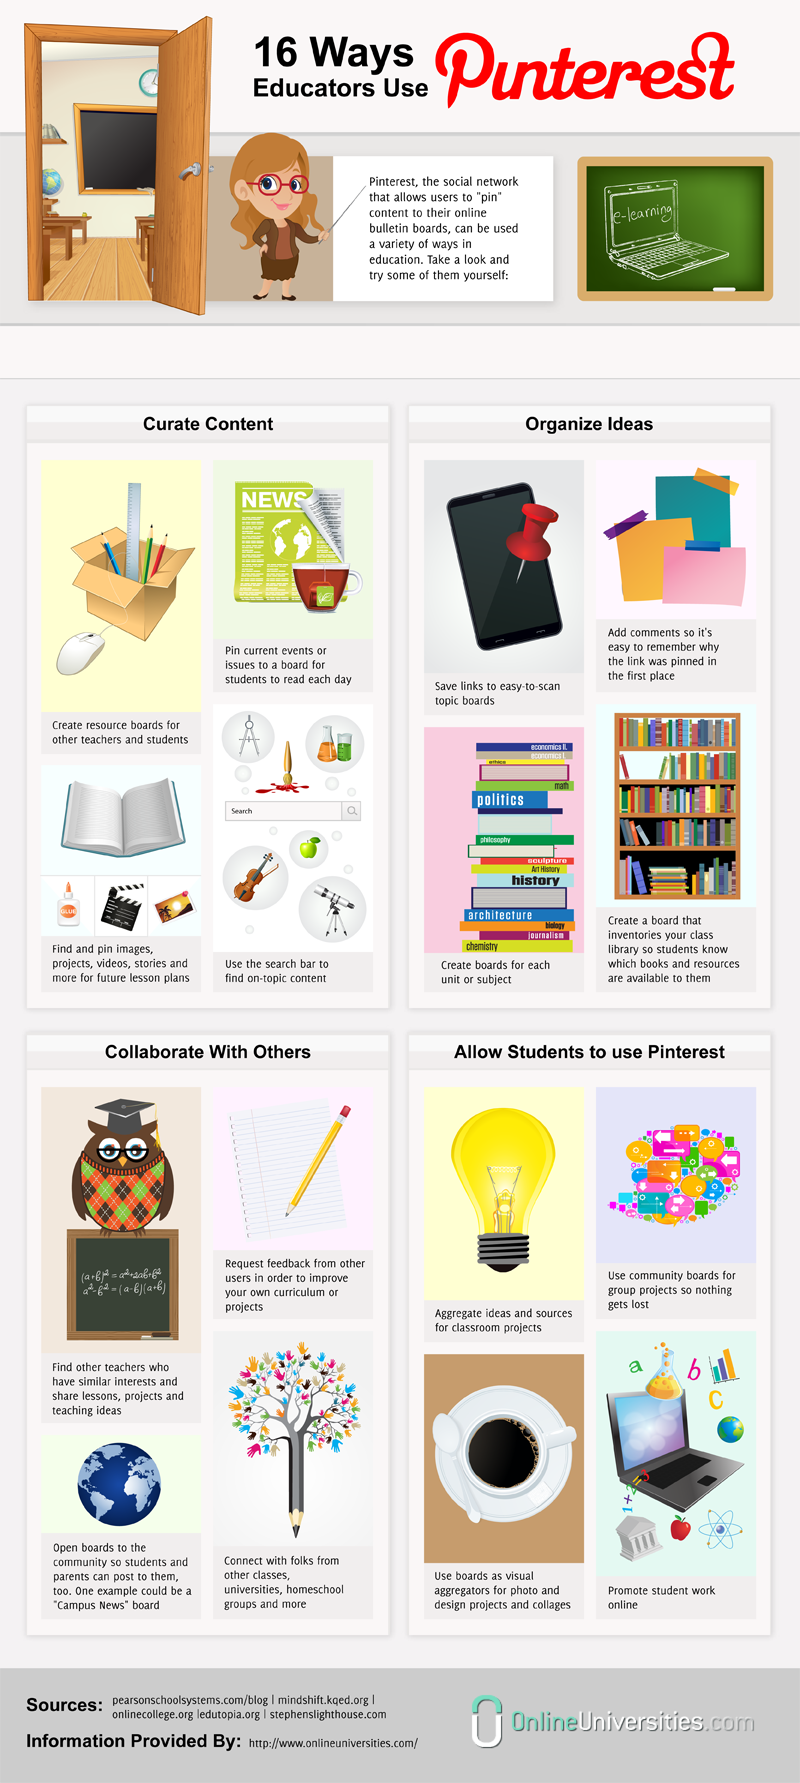 Uses of Pinterest in Education [INFOGRAPHIC]